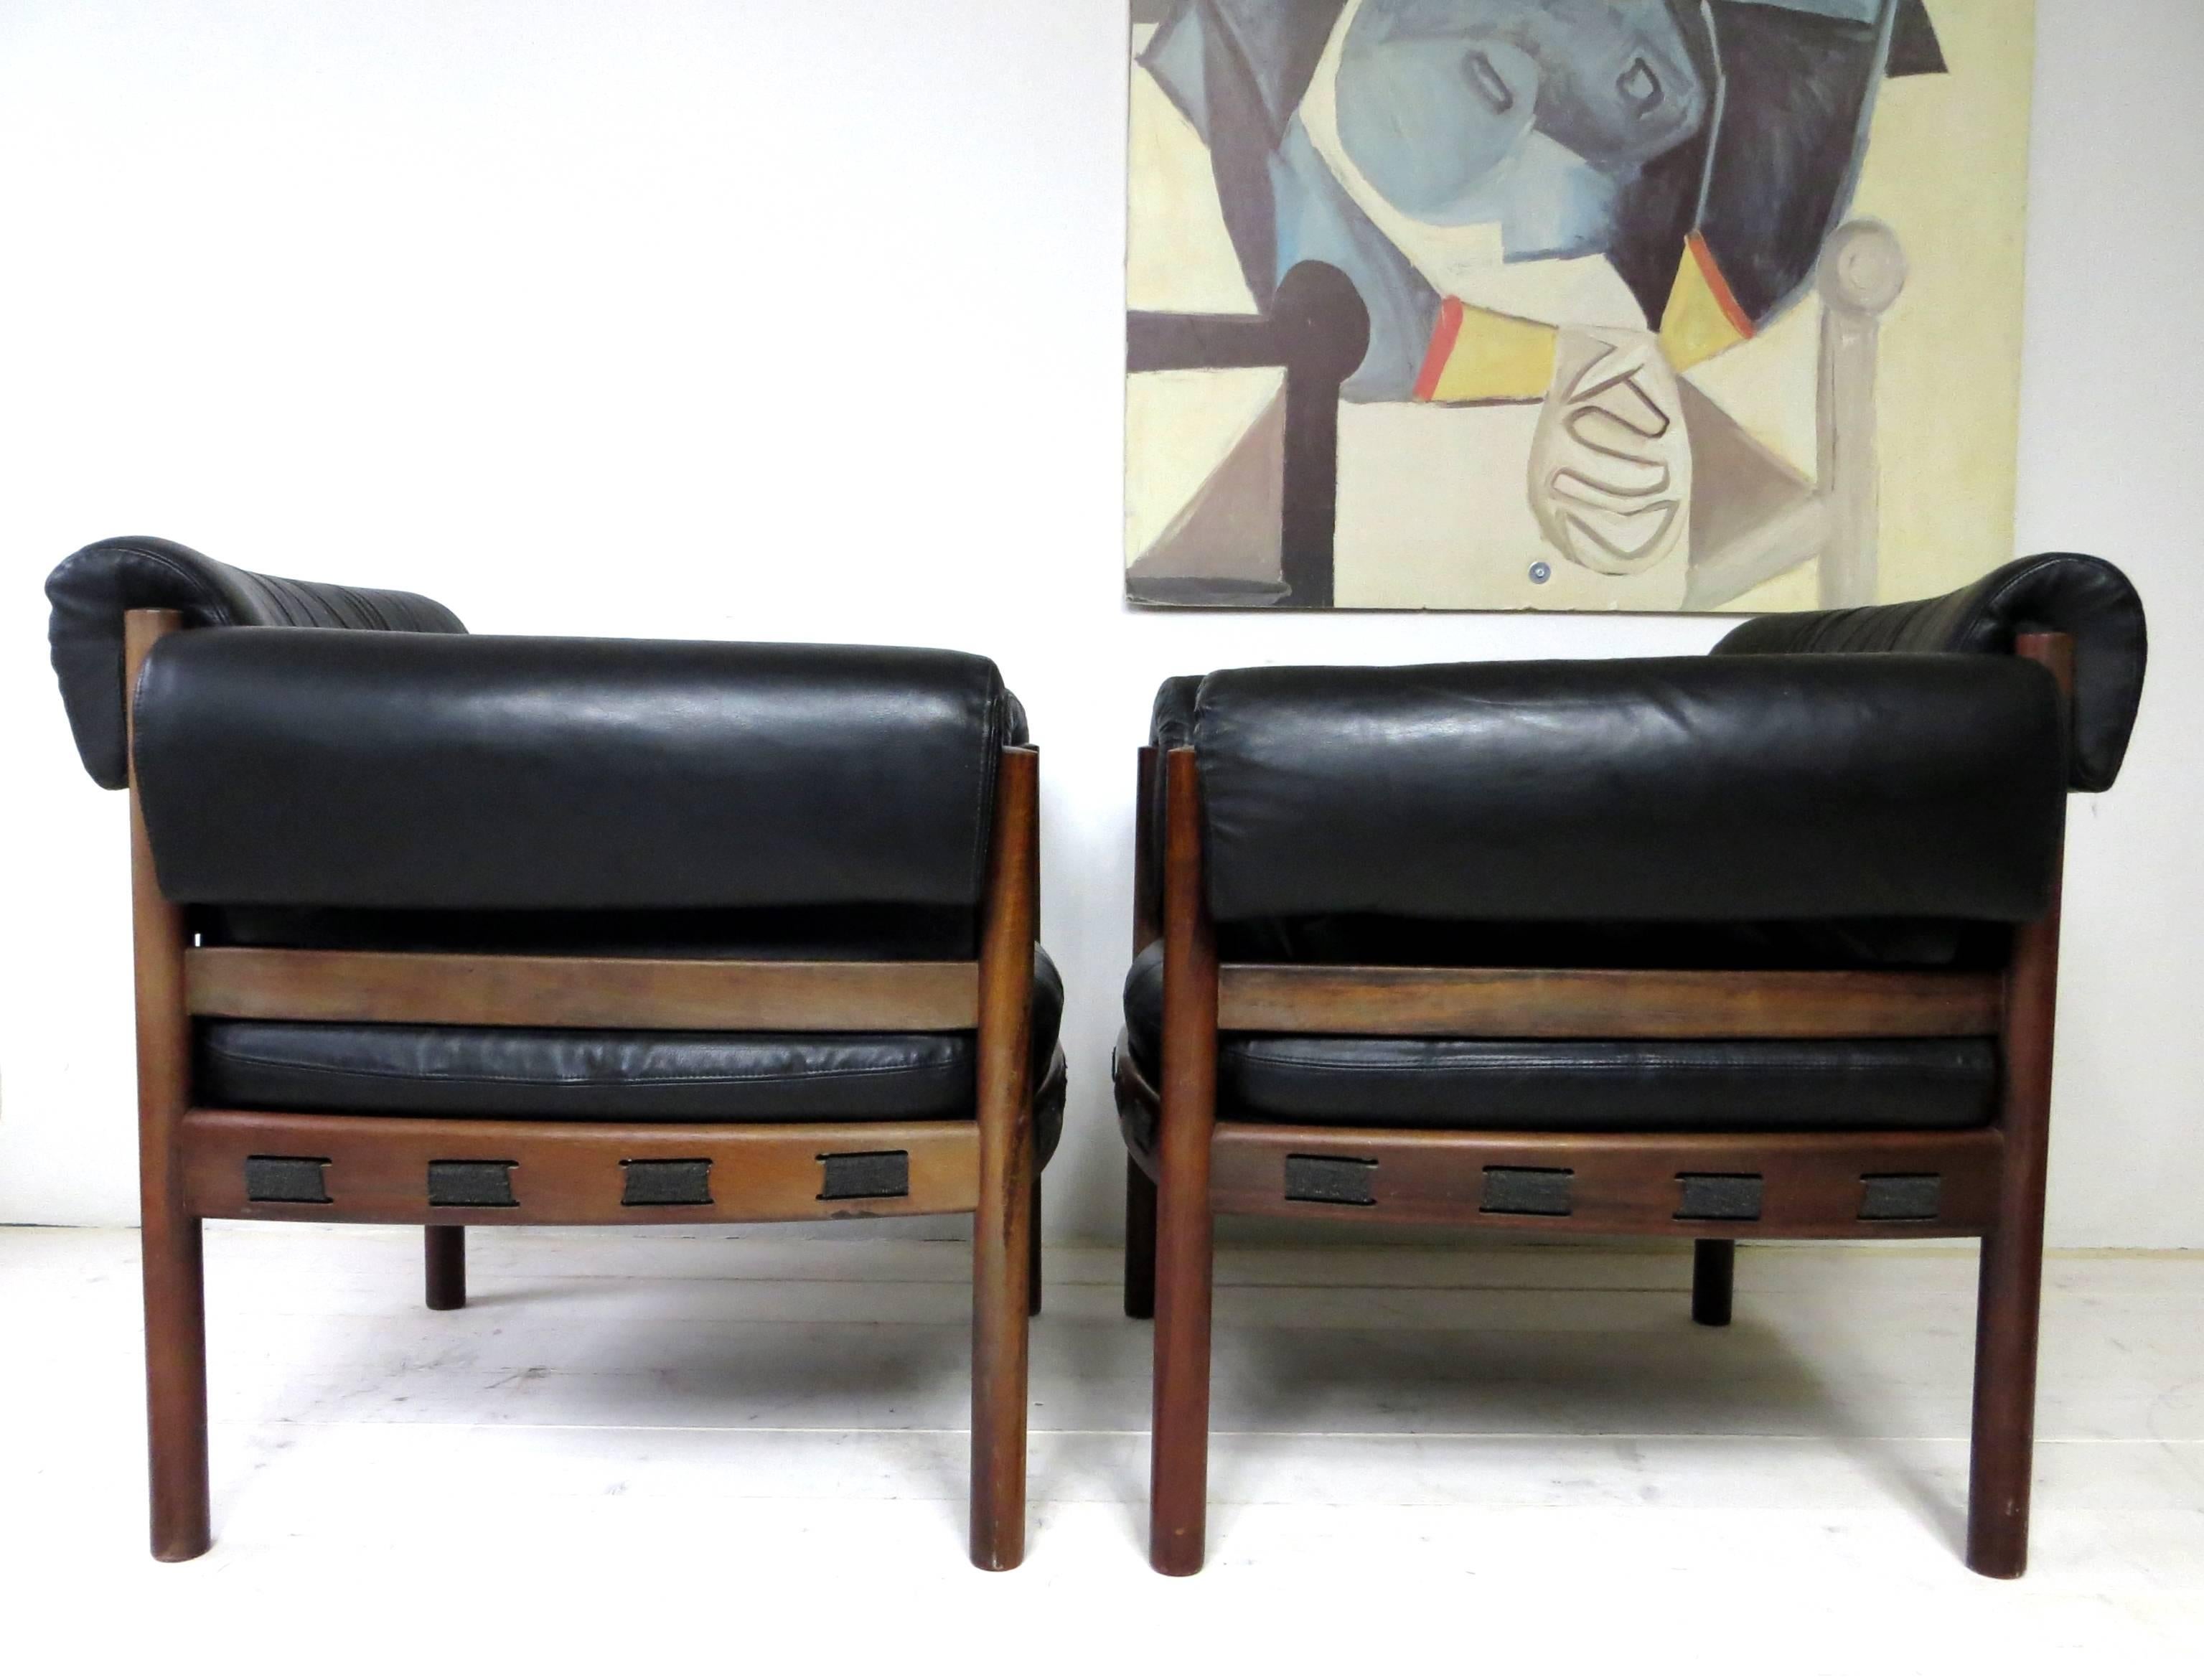 Swedish Pair of Arne Norell Rosewood Lounge Chairs for Coja Sweden in Black Leather